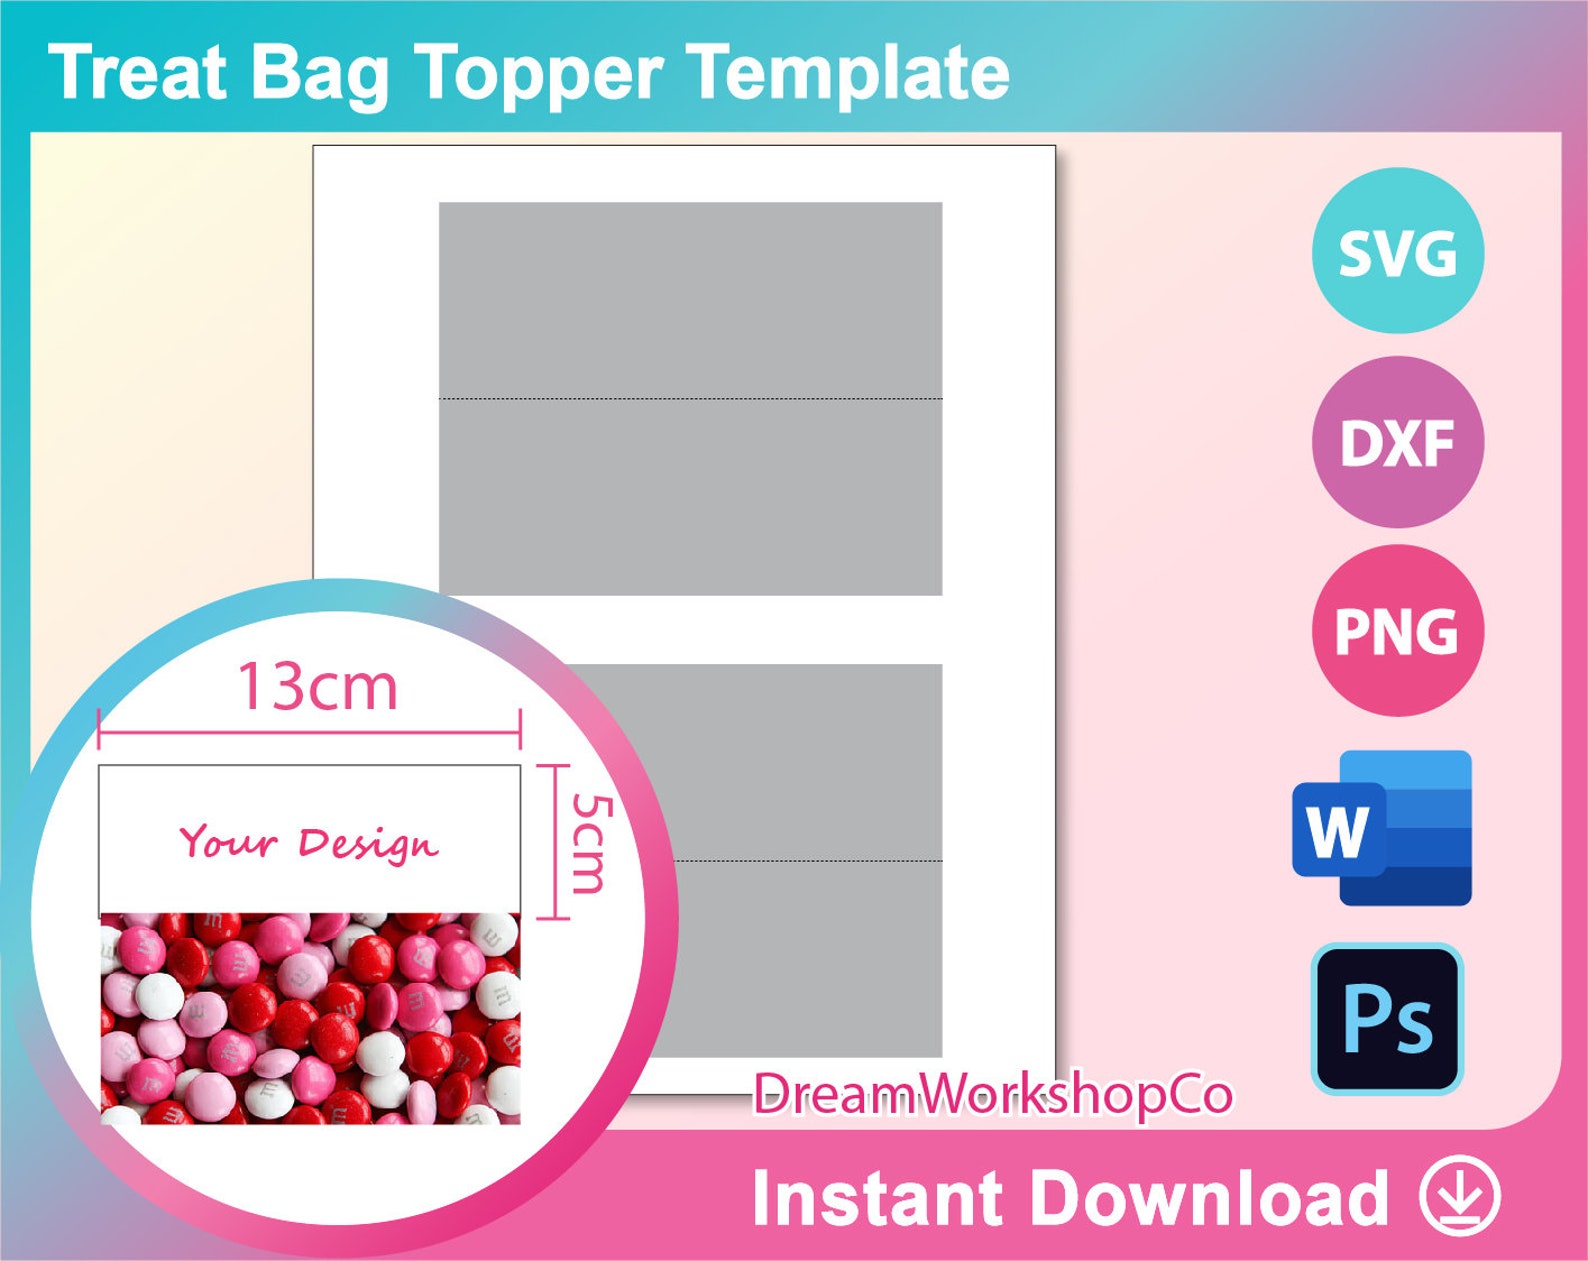 treat-bag-topper-template-svg-dxf-ms-word-docx-png-psd-etsy